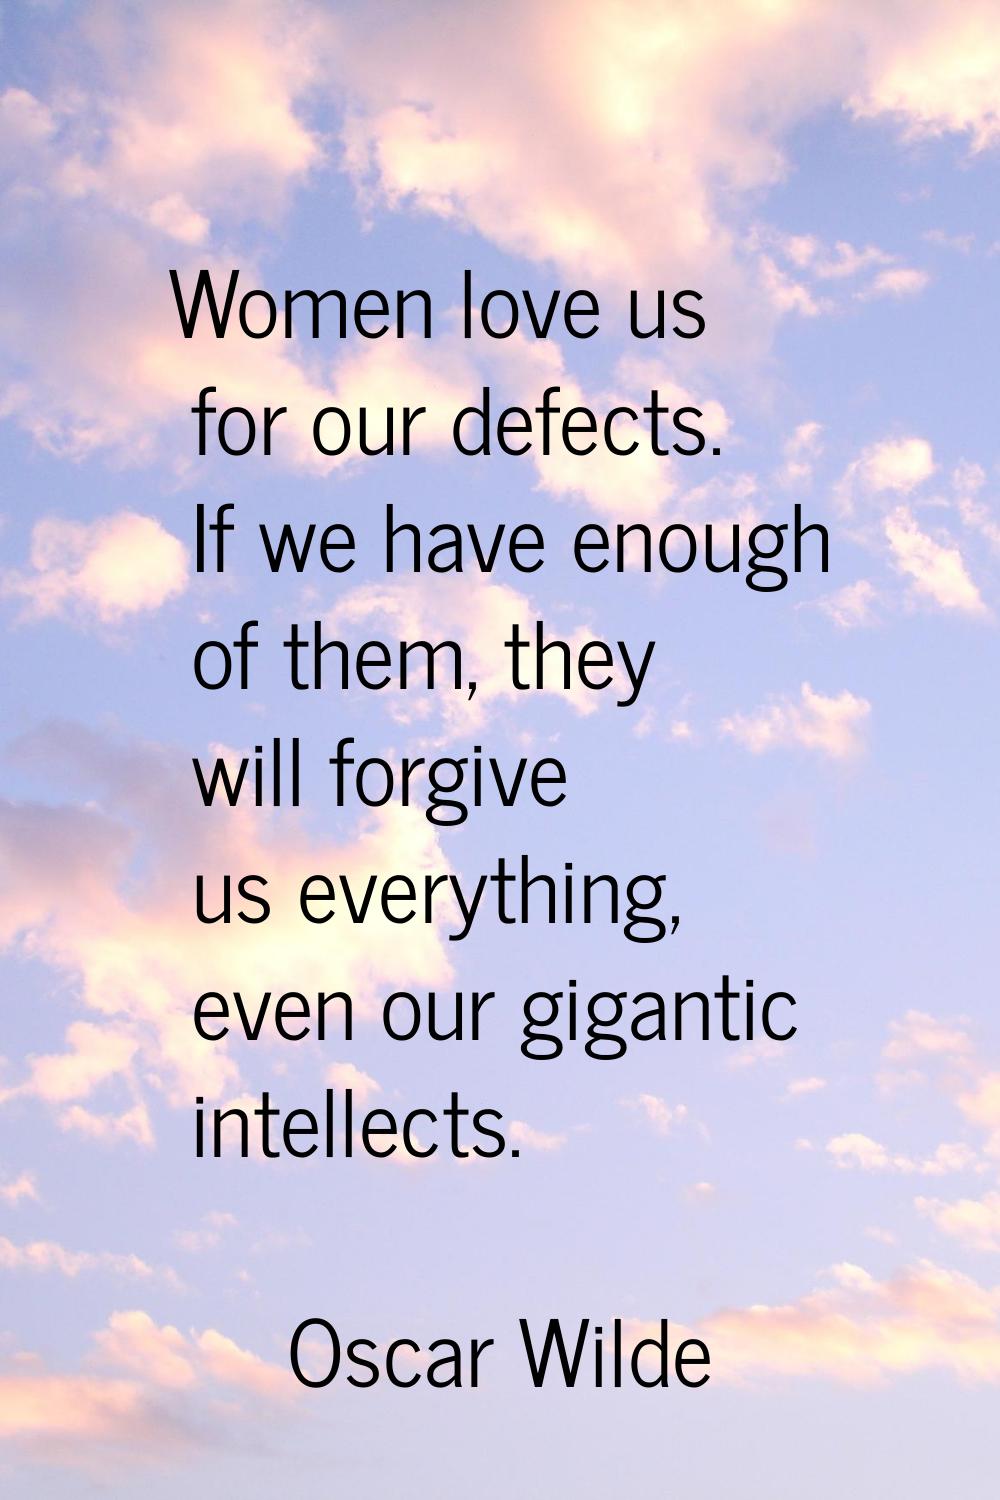 Women love us for our defects. If we have enough of them, they will forgive us everything, even our